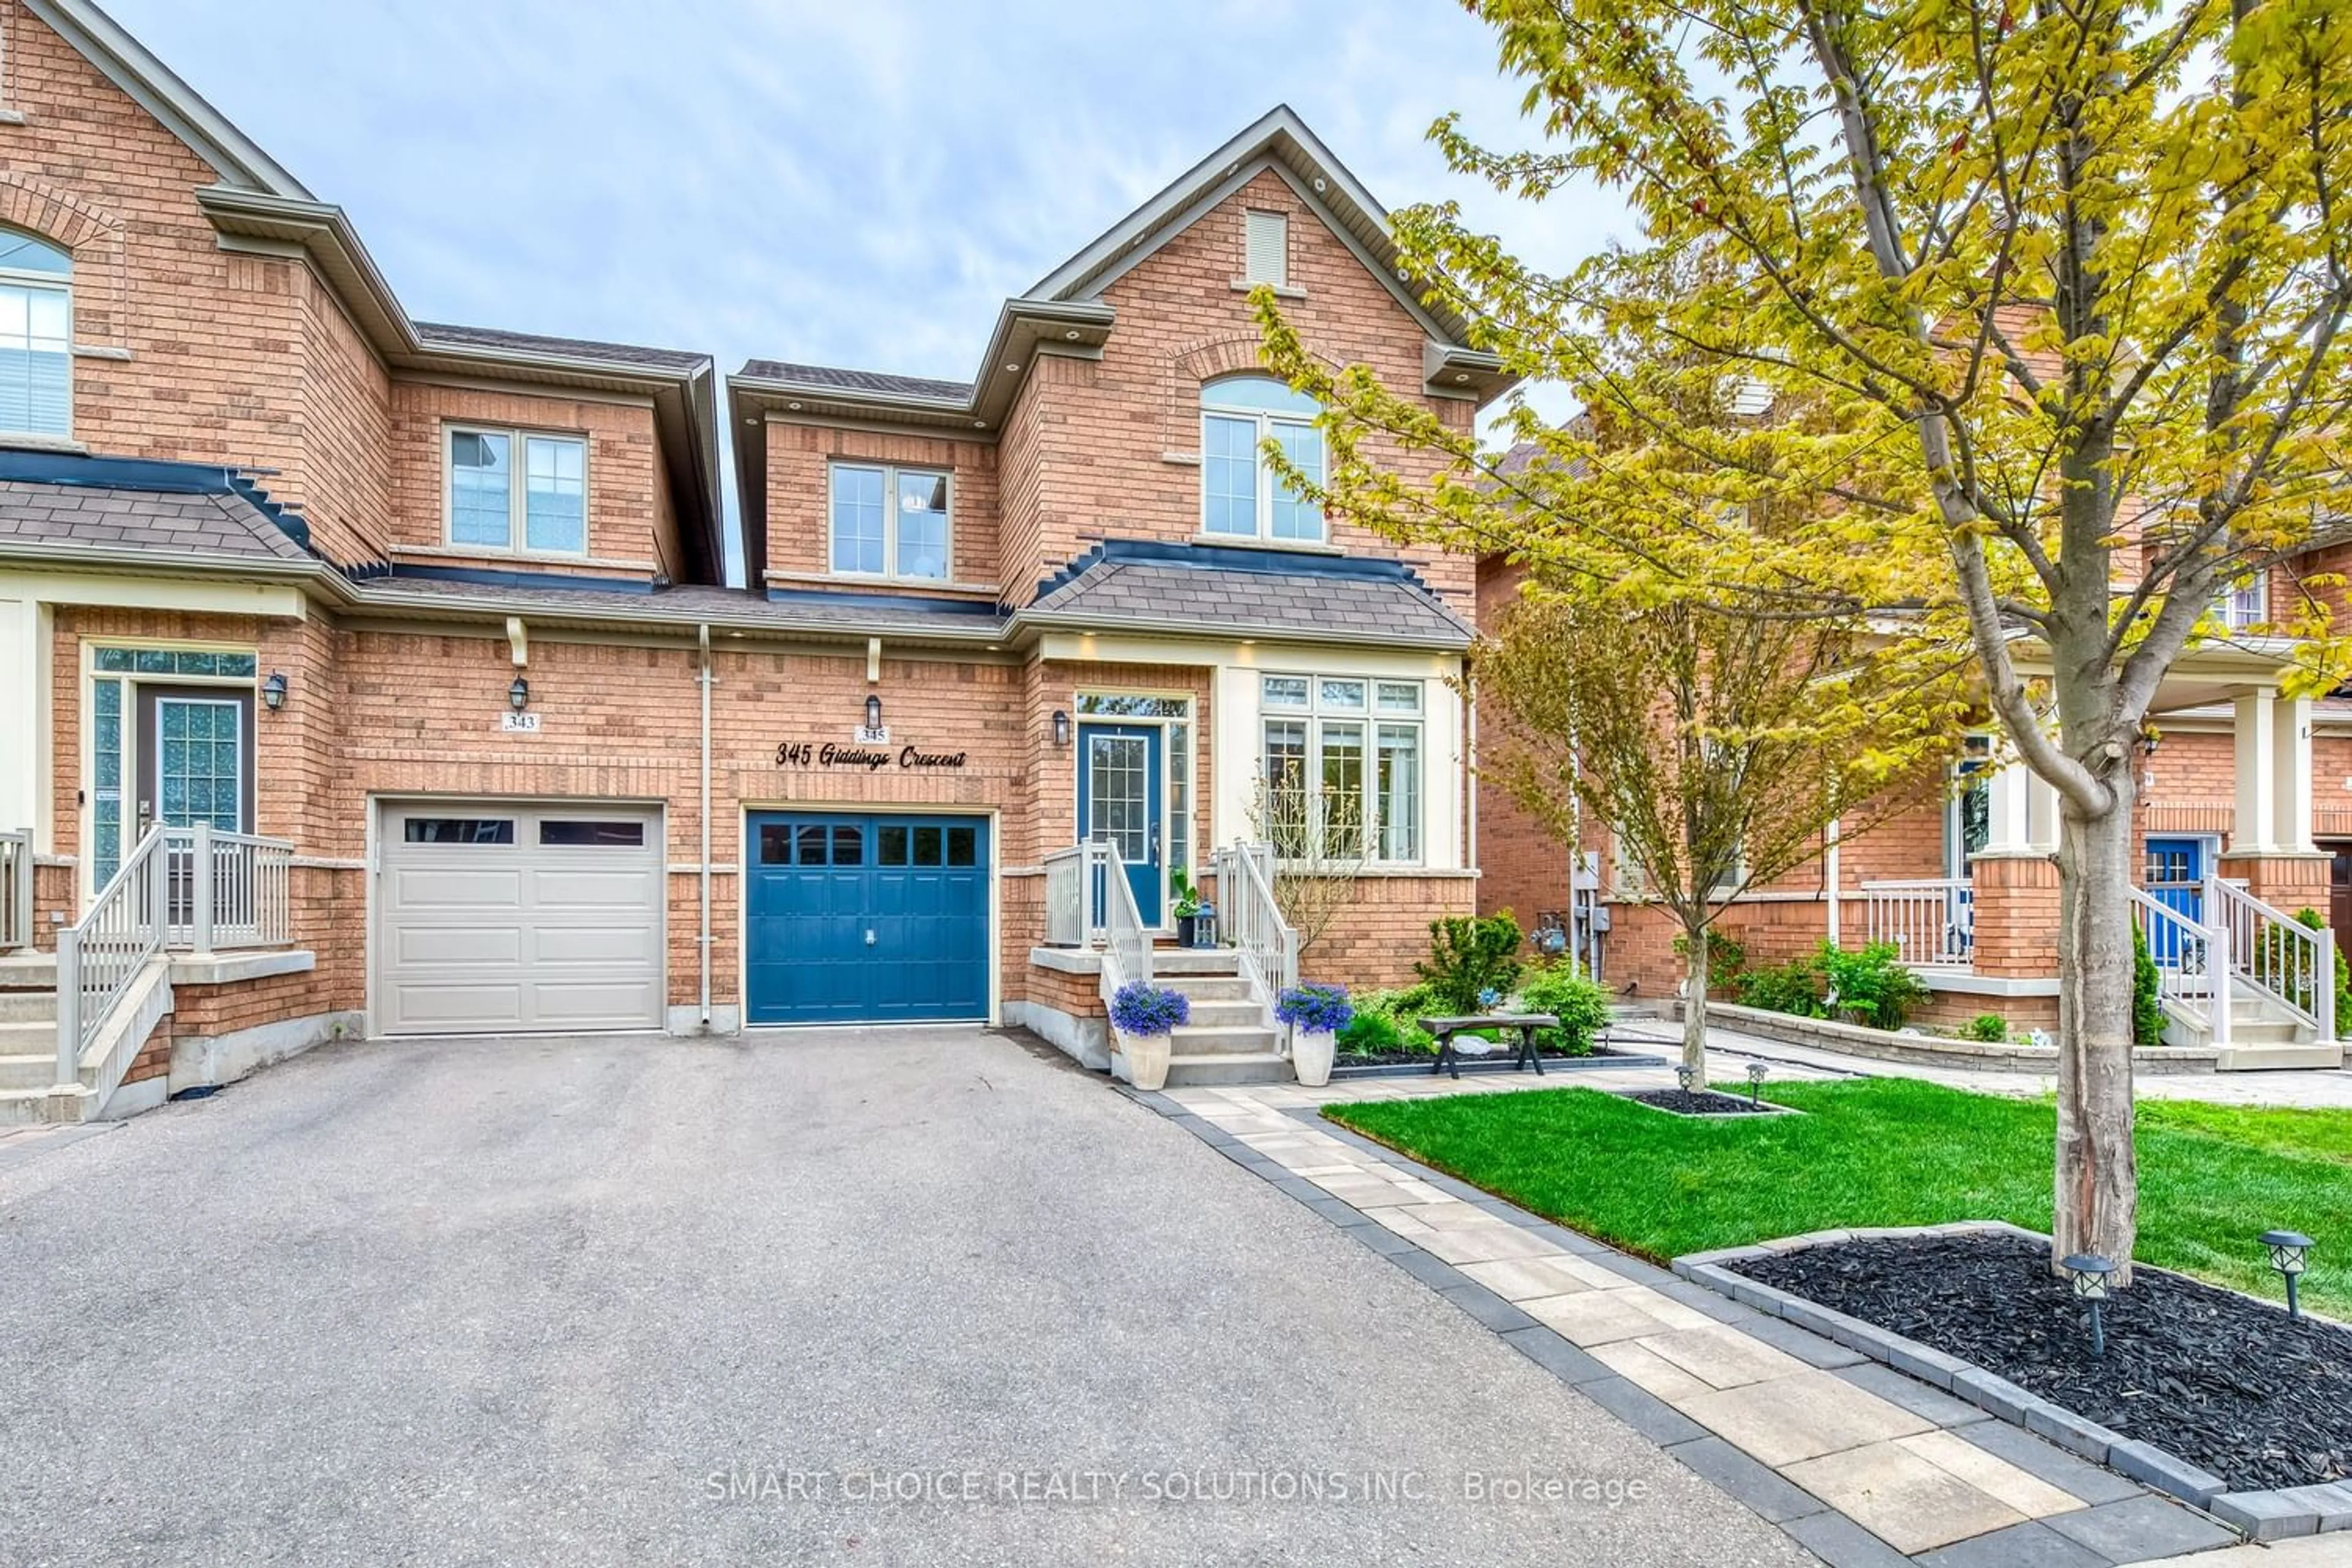 Home with brick exterior material for 345 Giddings Cres, Milton Ontario L9T 7A4